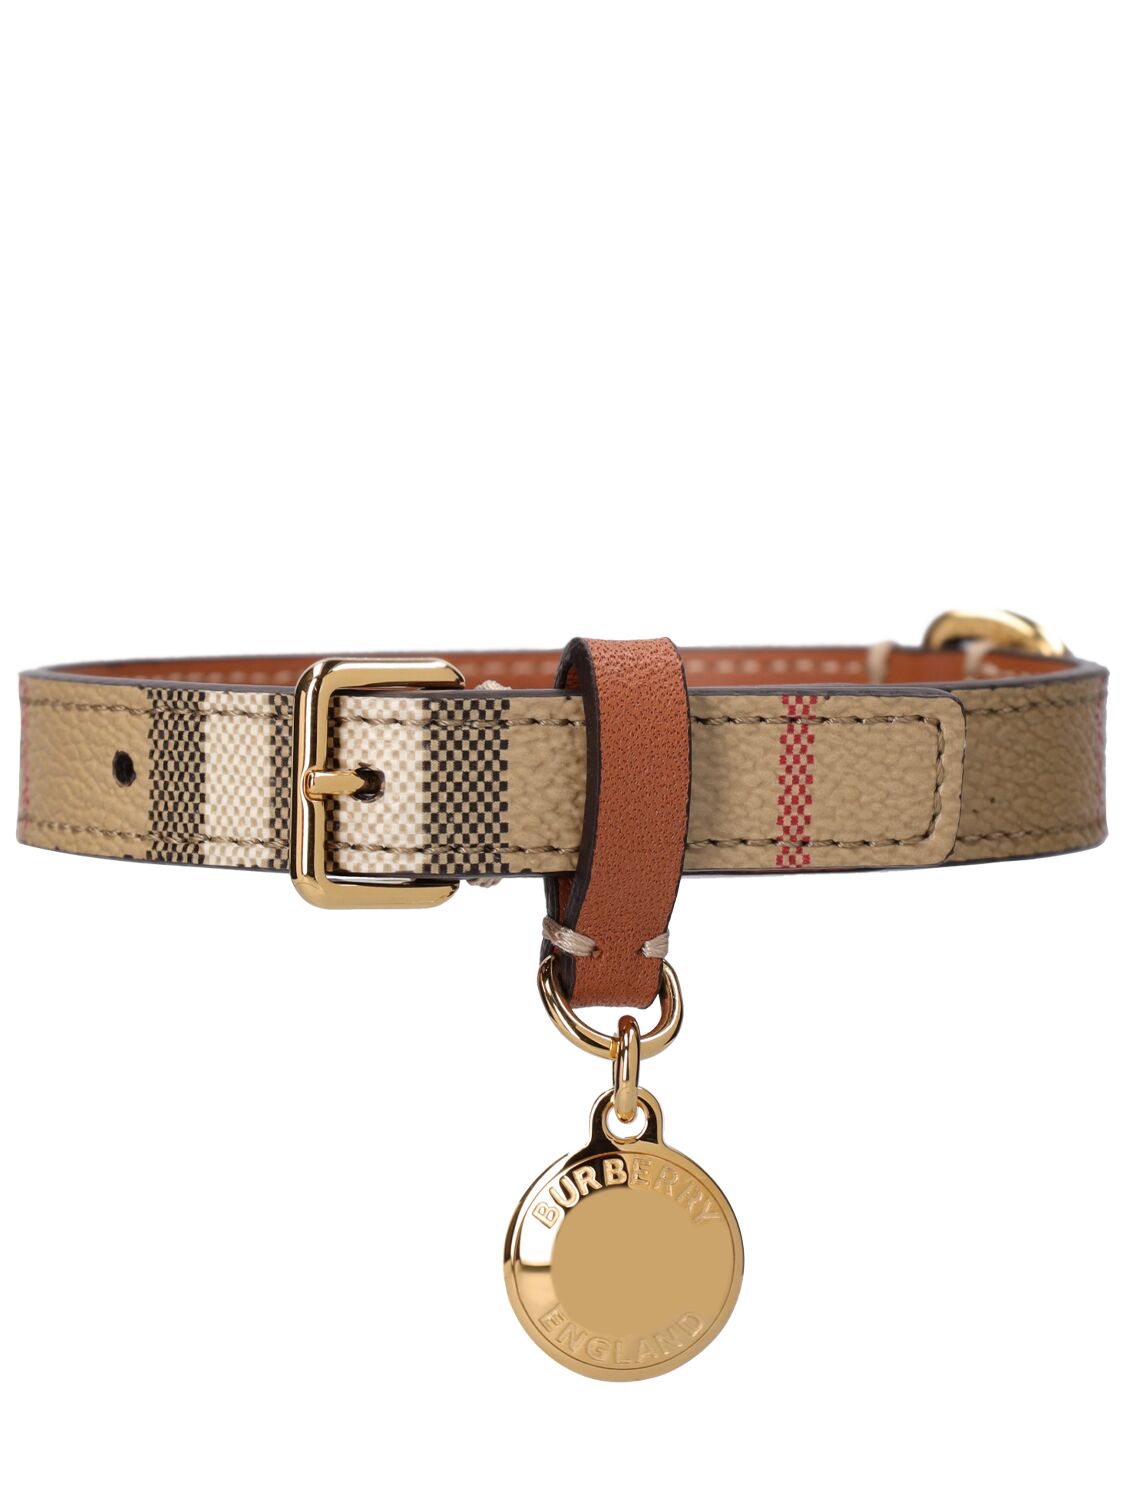 Burberry Check Printed Dog Collar In Vcheck,brown